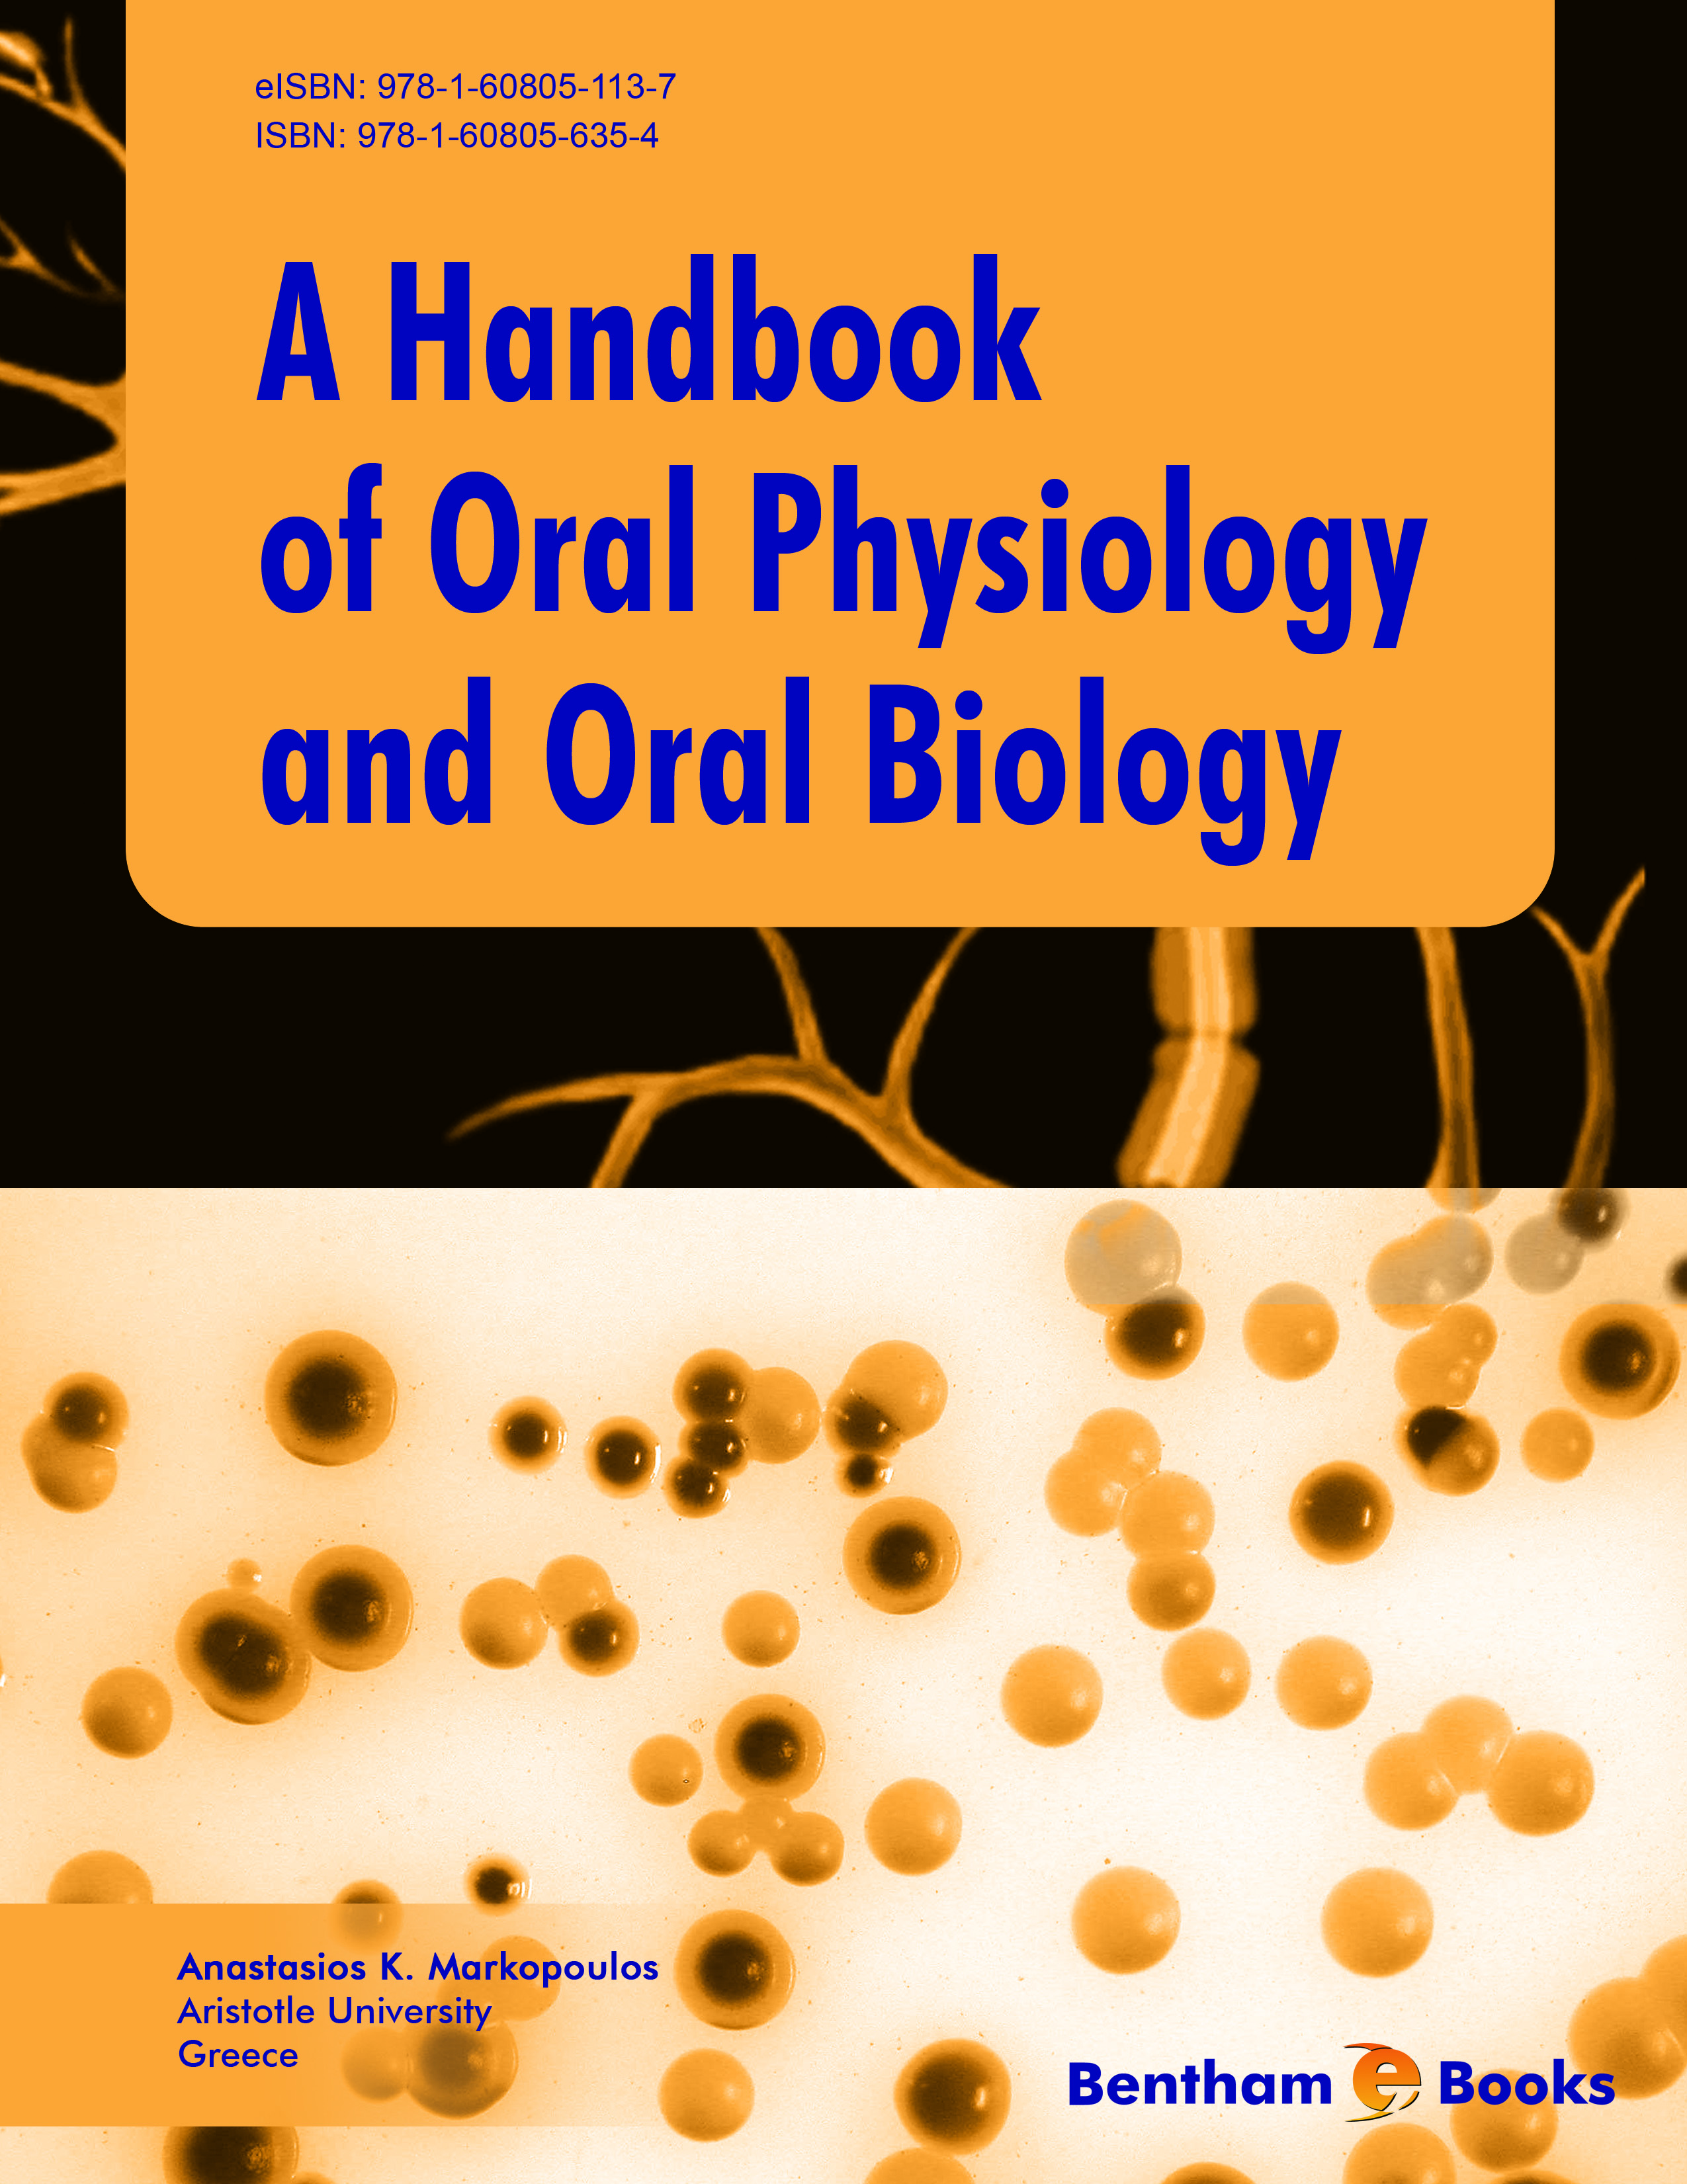 A Handbook of Oral Physiology and Oral Biology